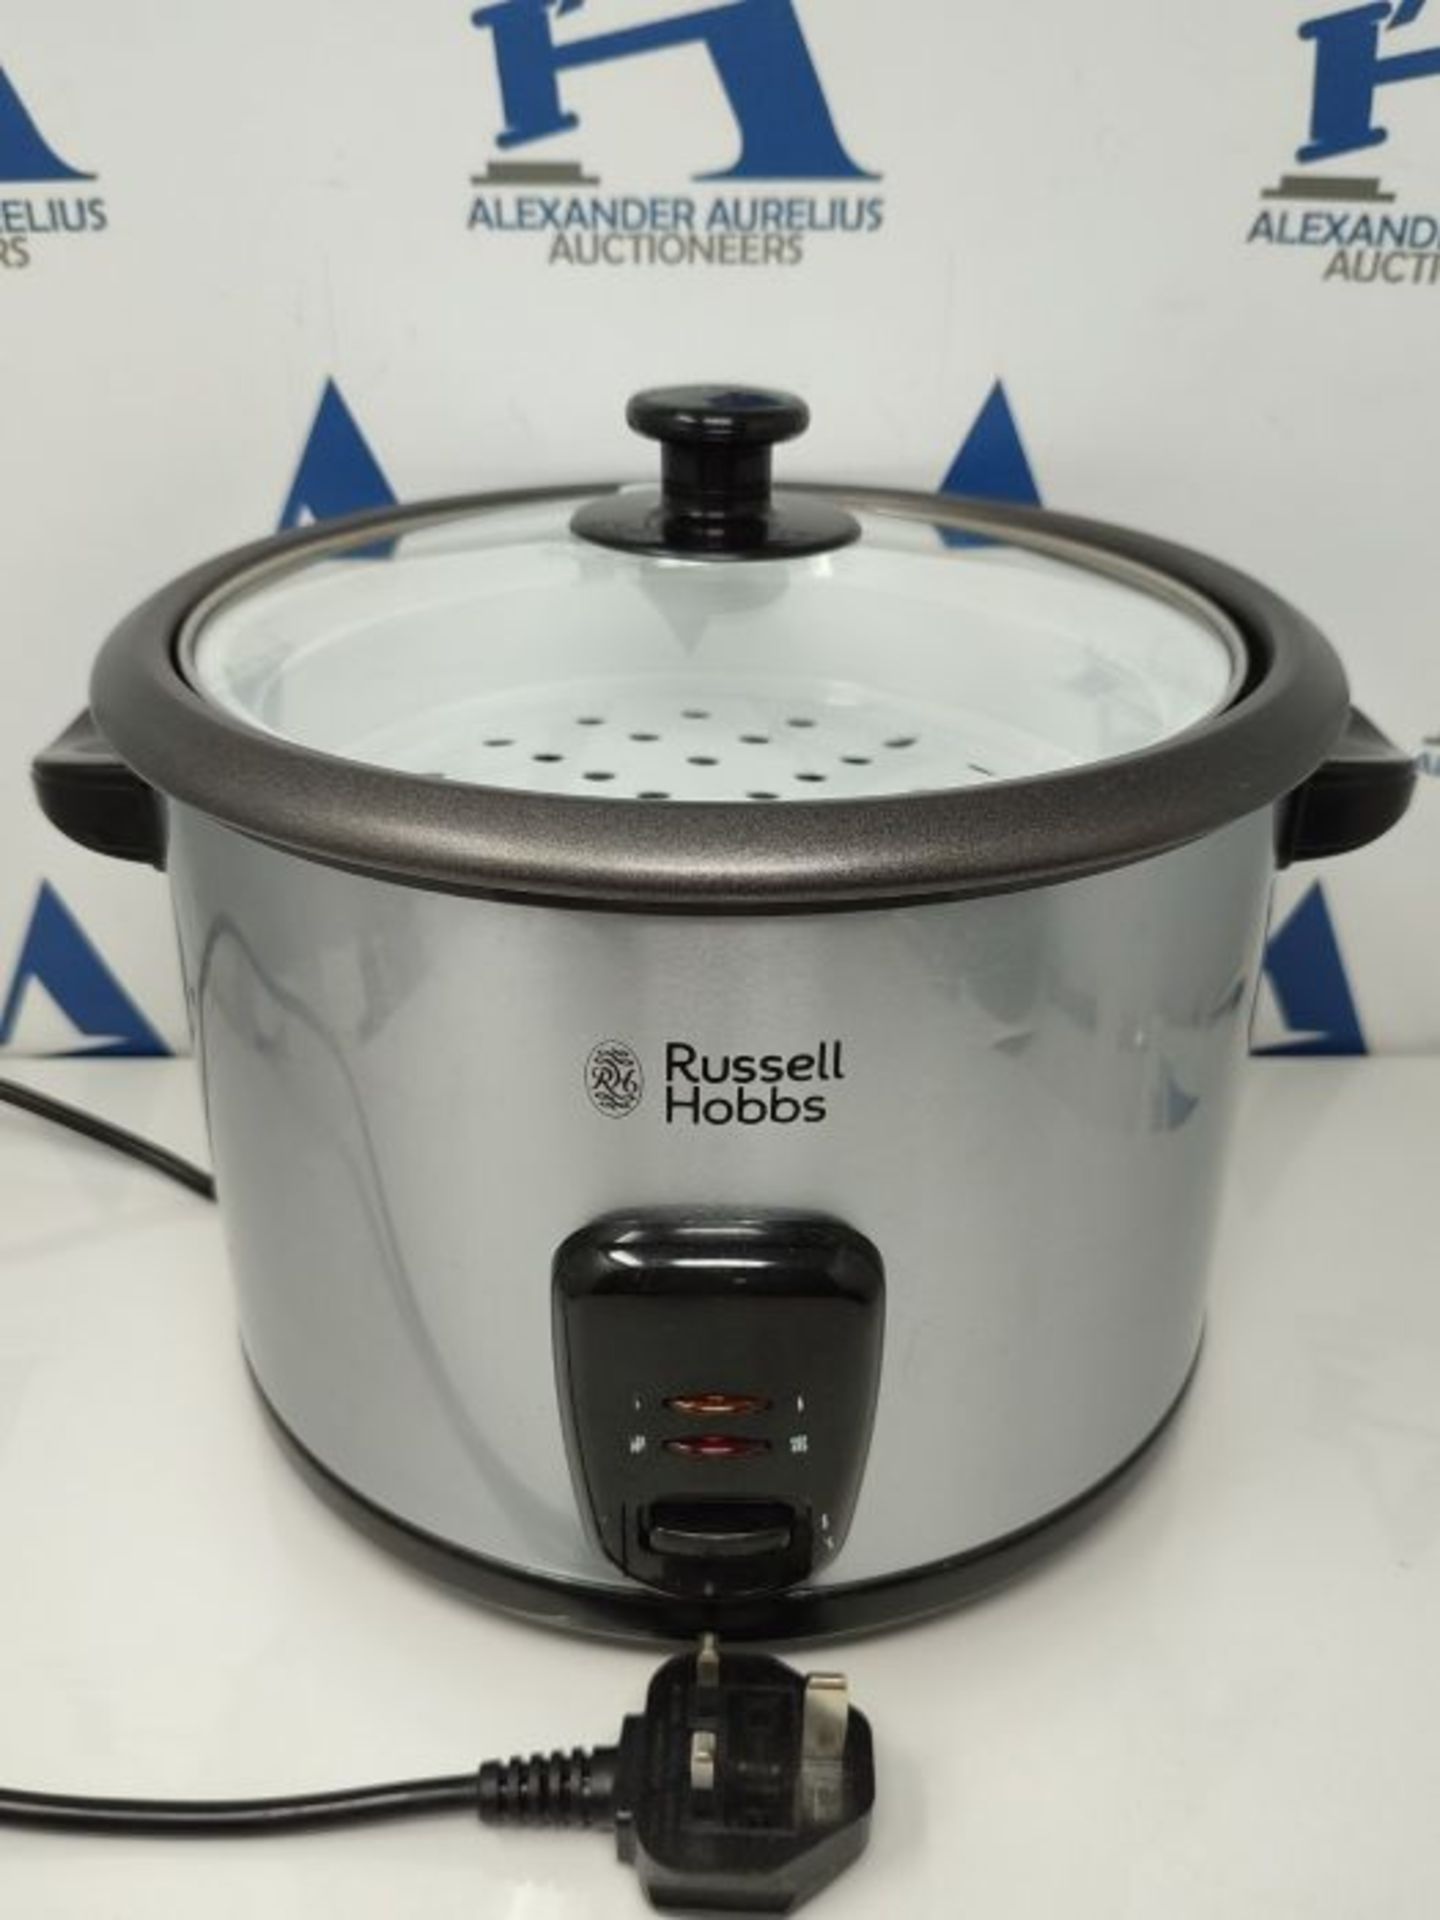 Russell Hobbs 19750 Rice Cooker and Steamer, 1.8L, Silver - Image 2 of 2